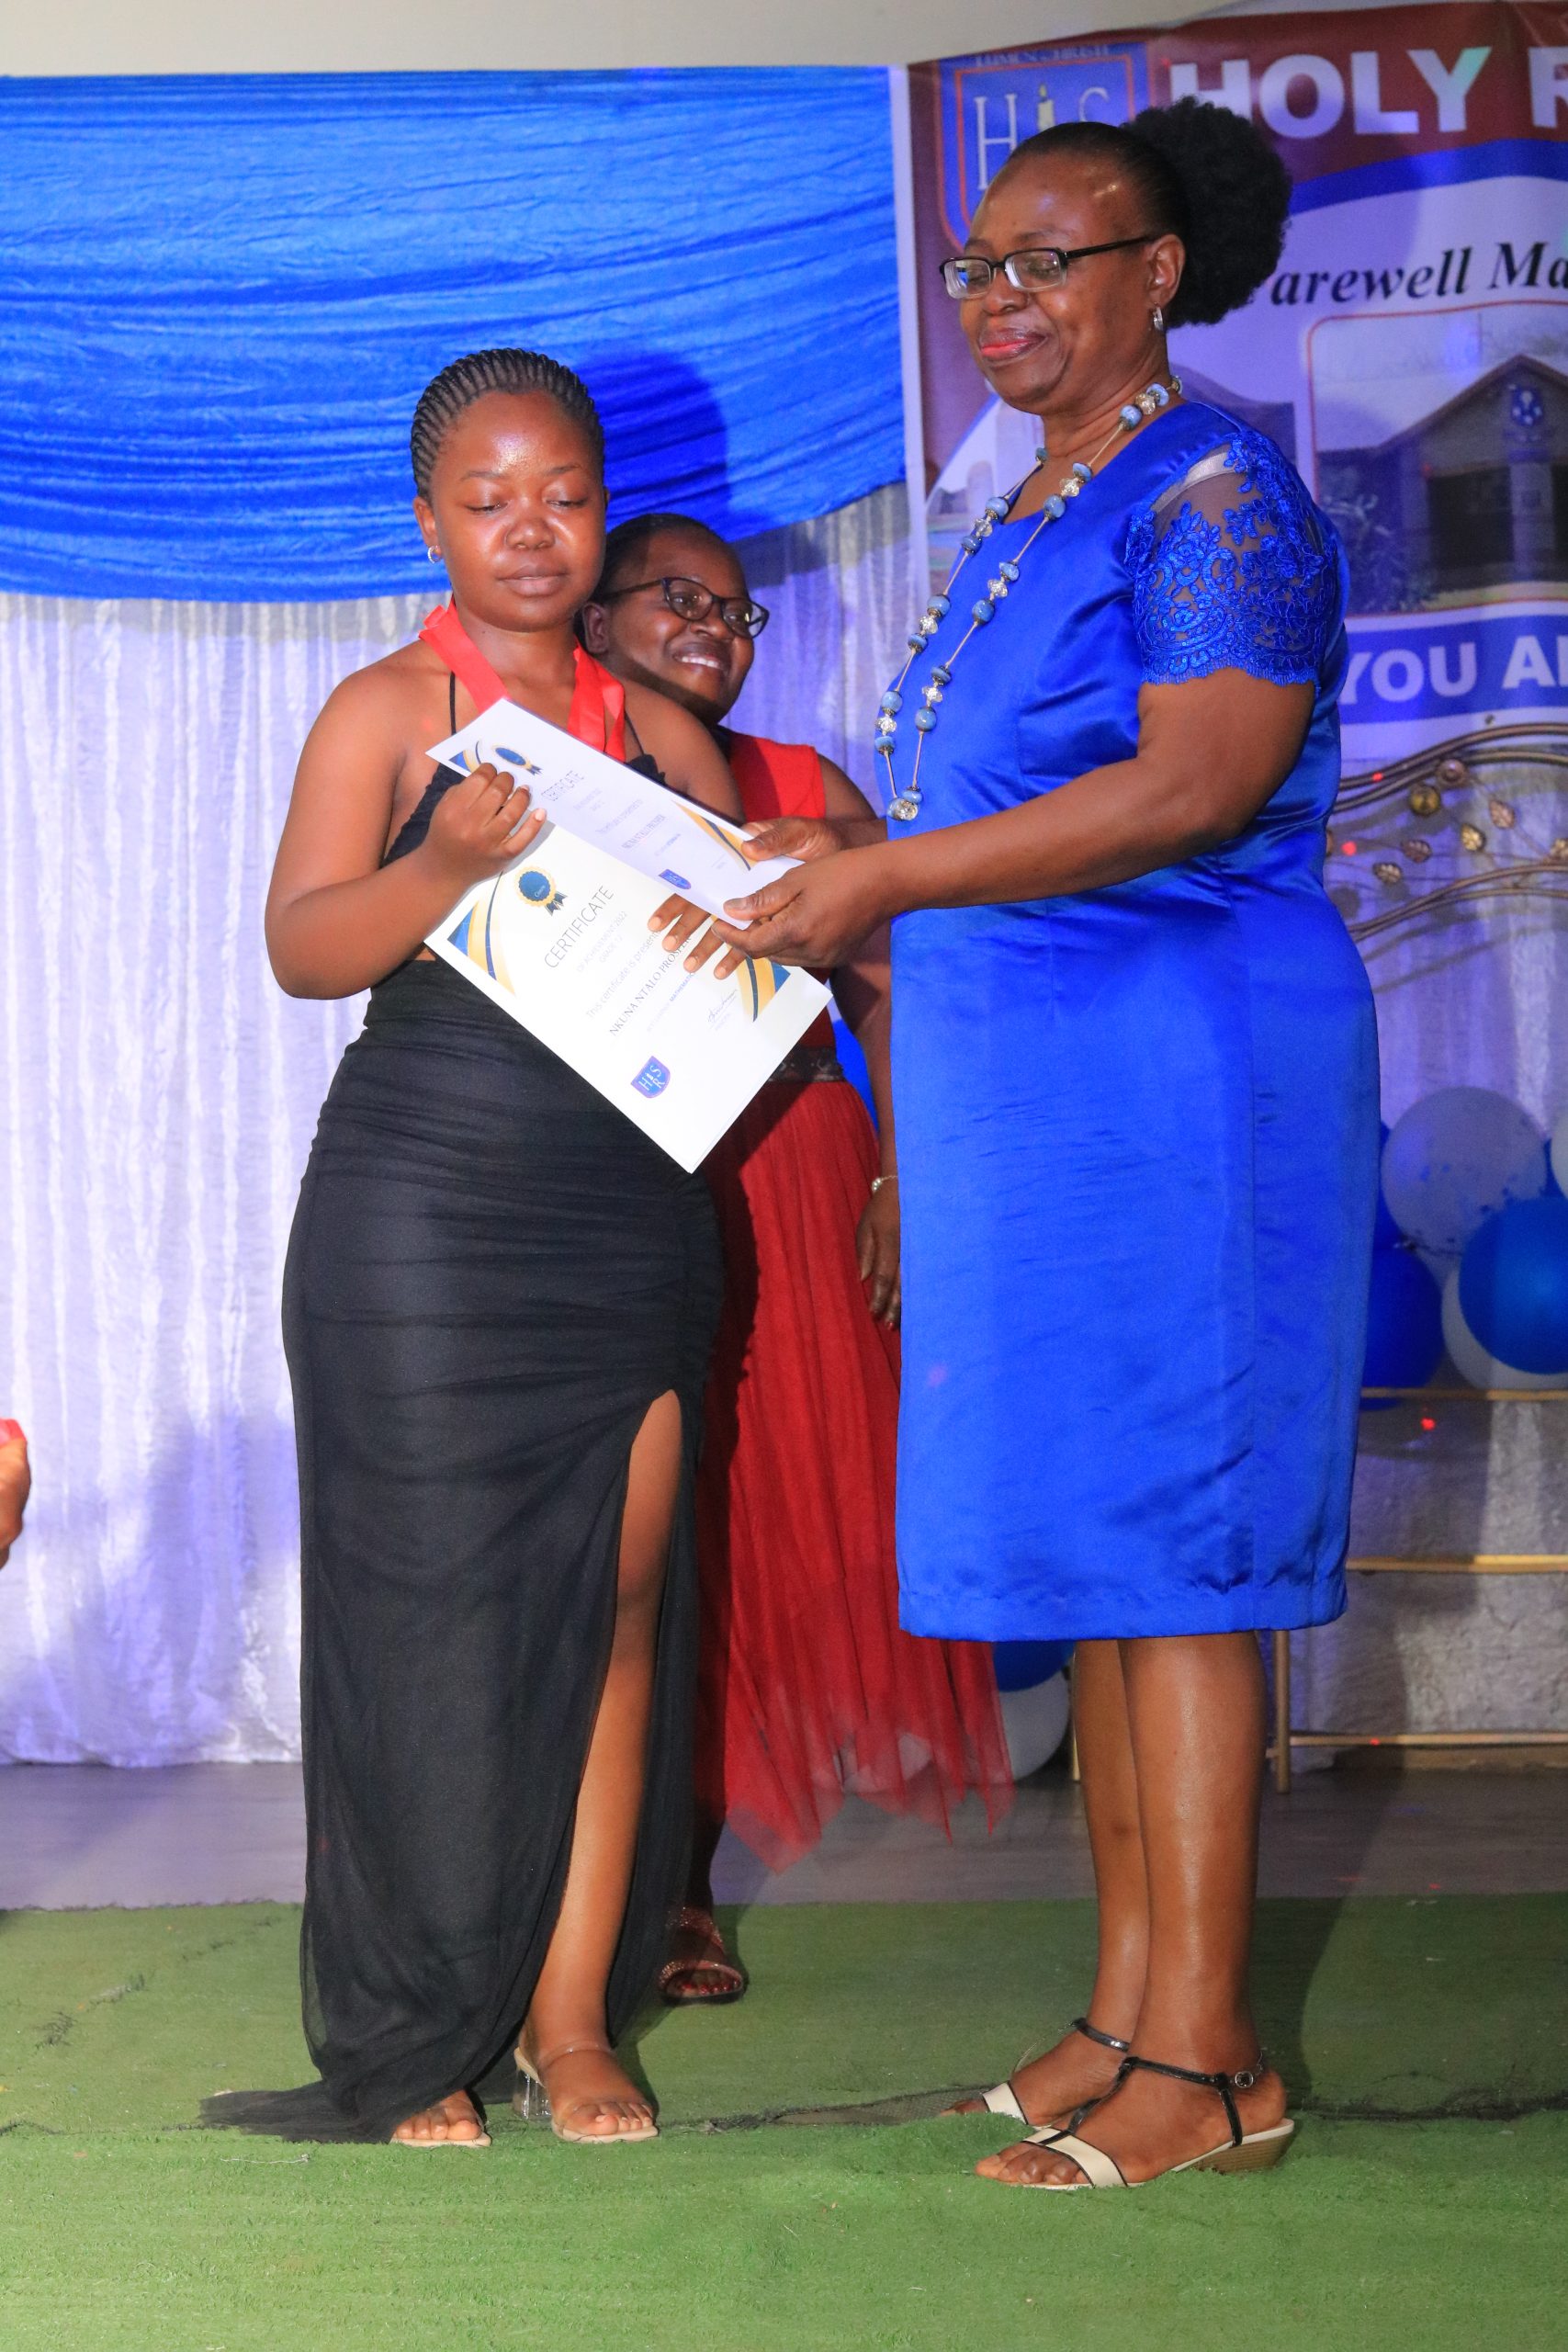 MATRIC FAREWELL PARTY PART II. (AWARDS CEREMONY)